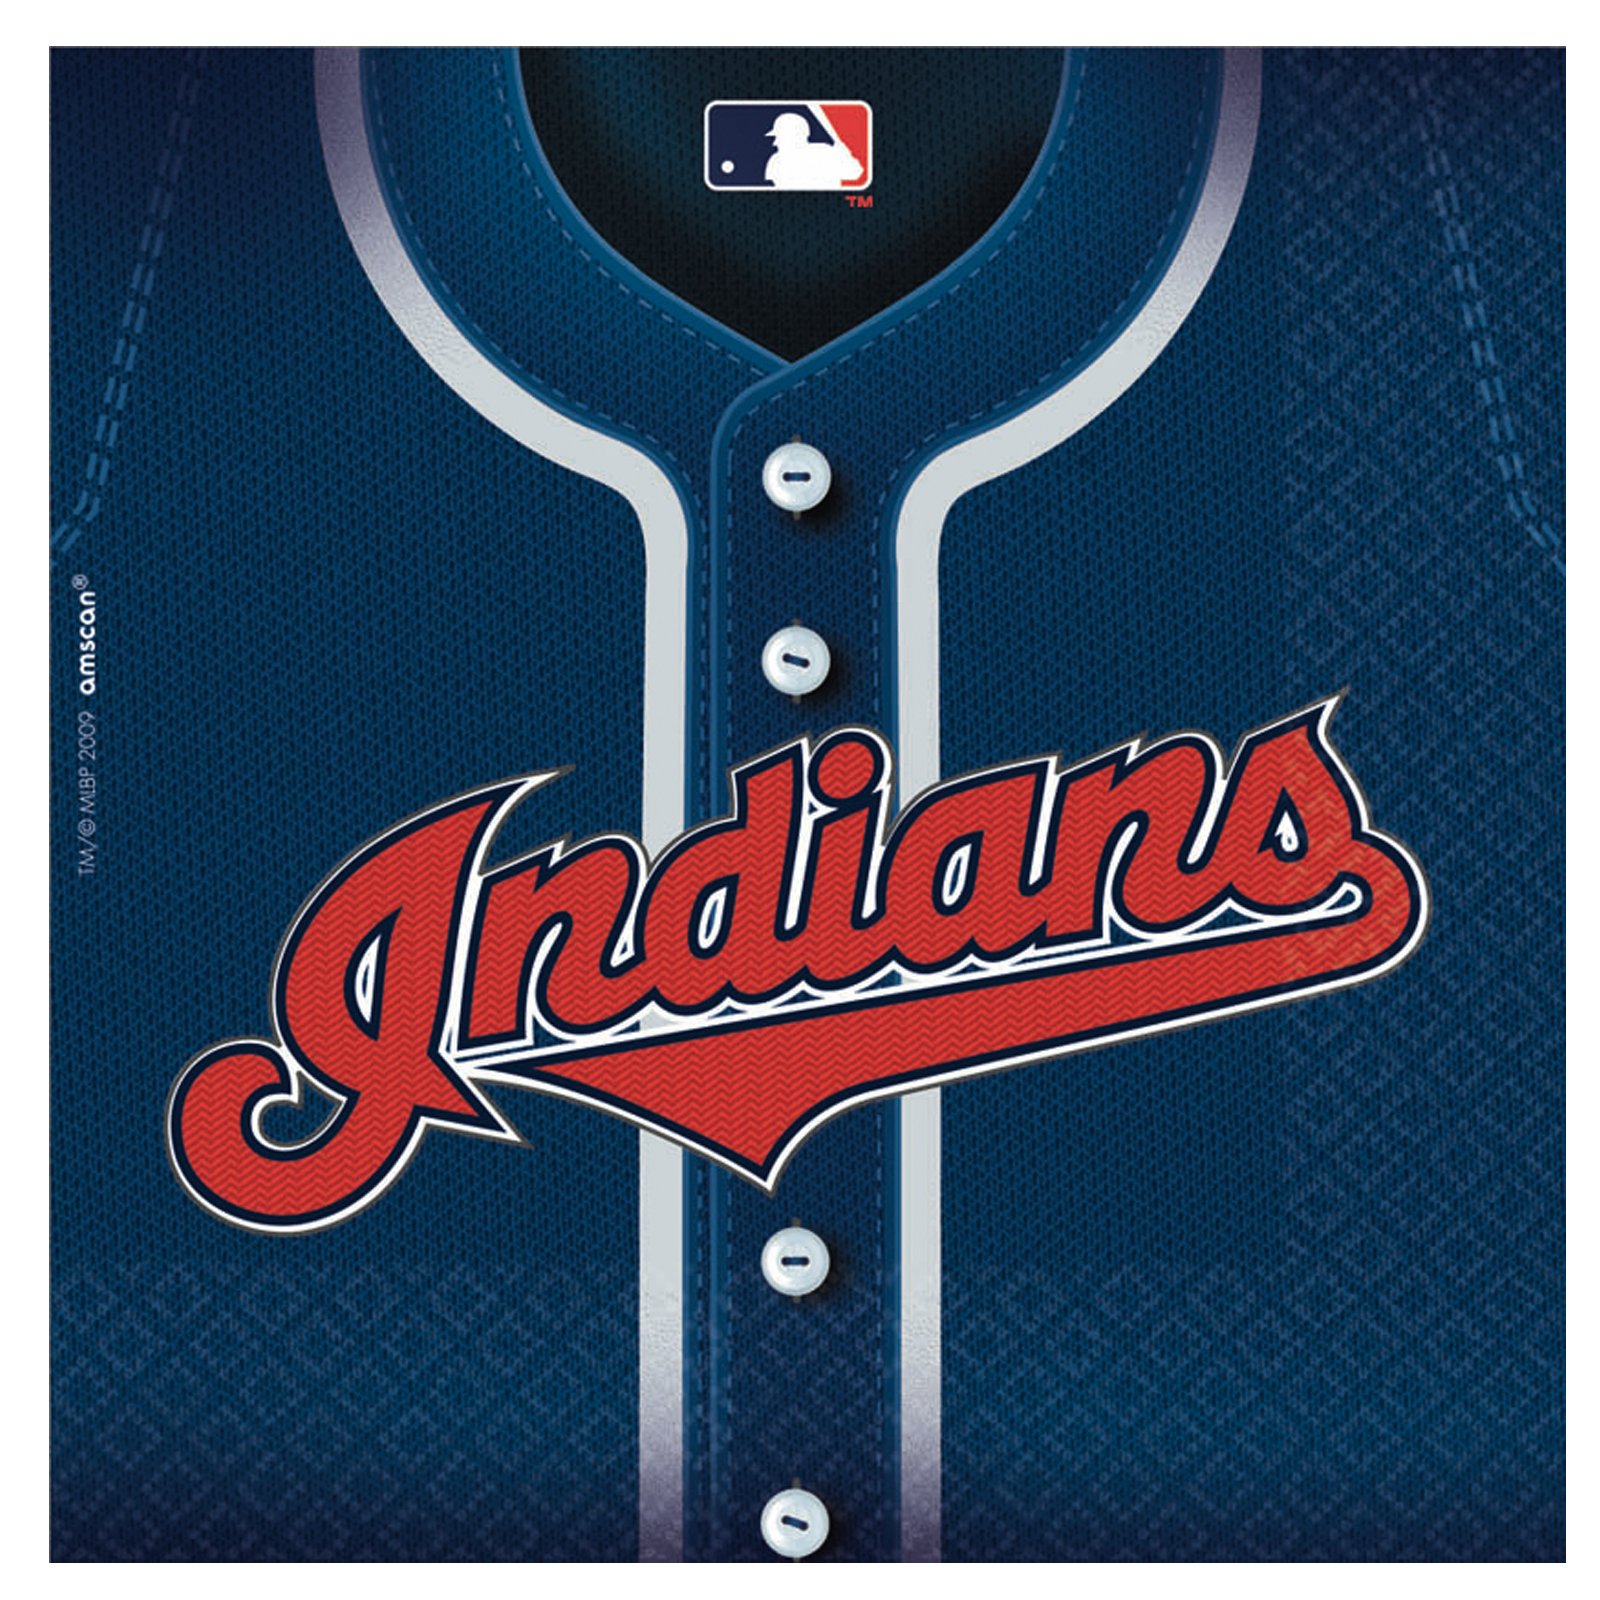 Cleveland Indians Baseball - Lunch Napkins (36 count)